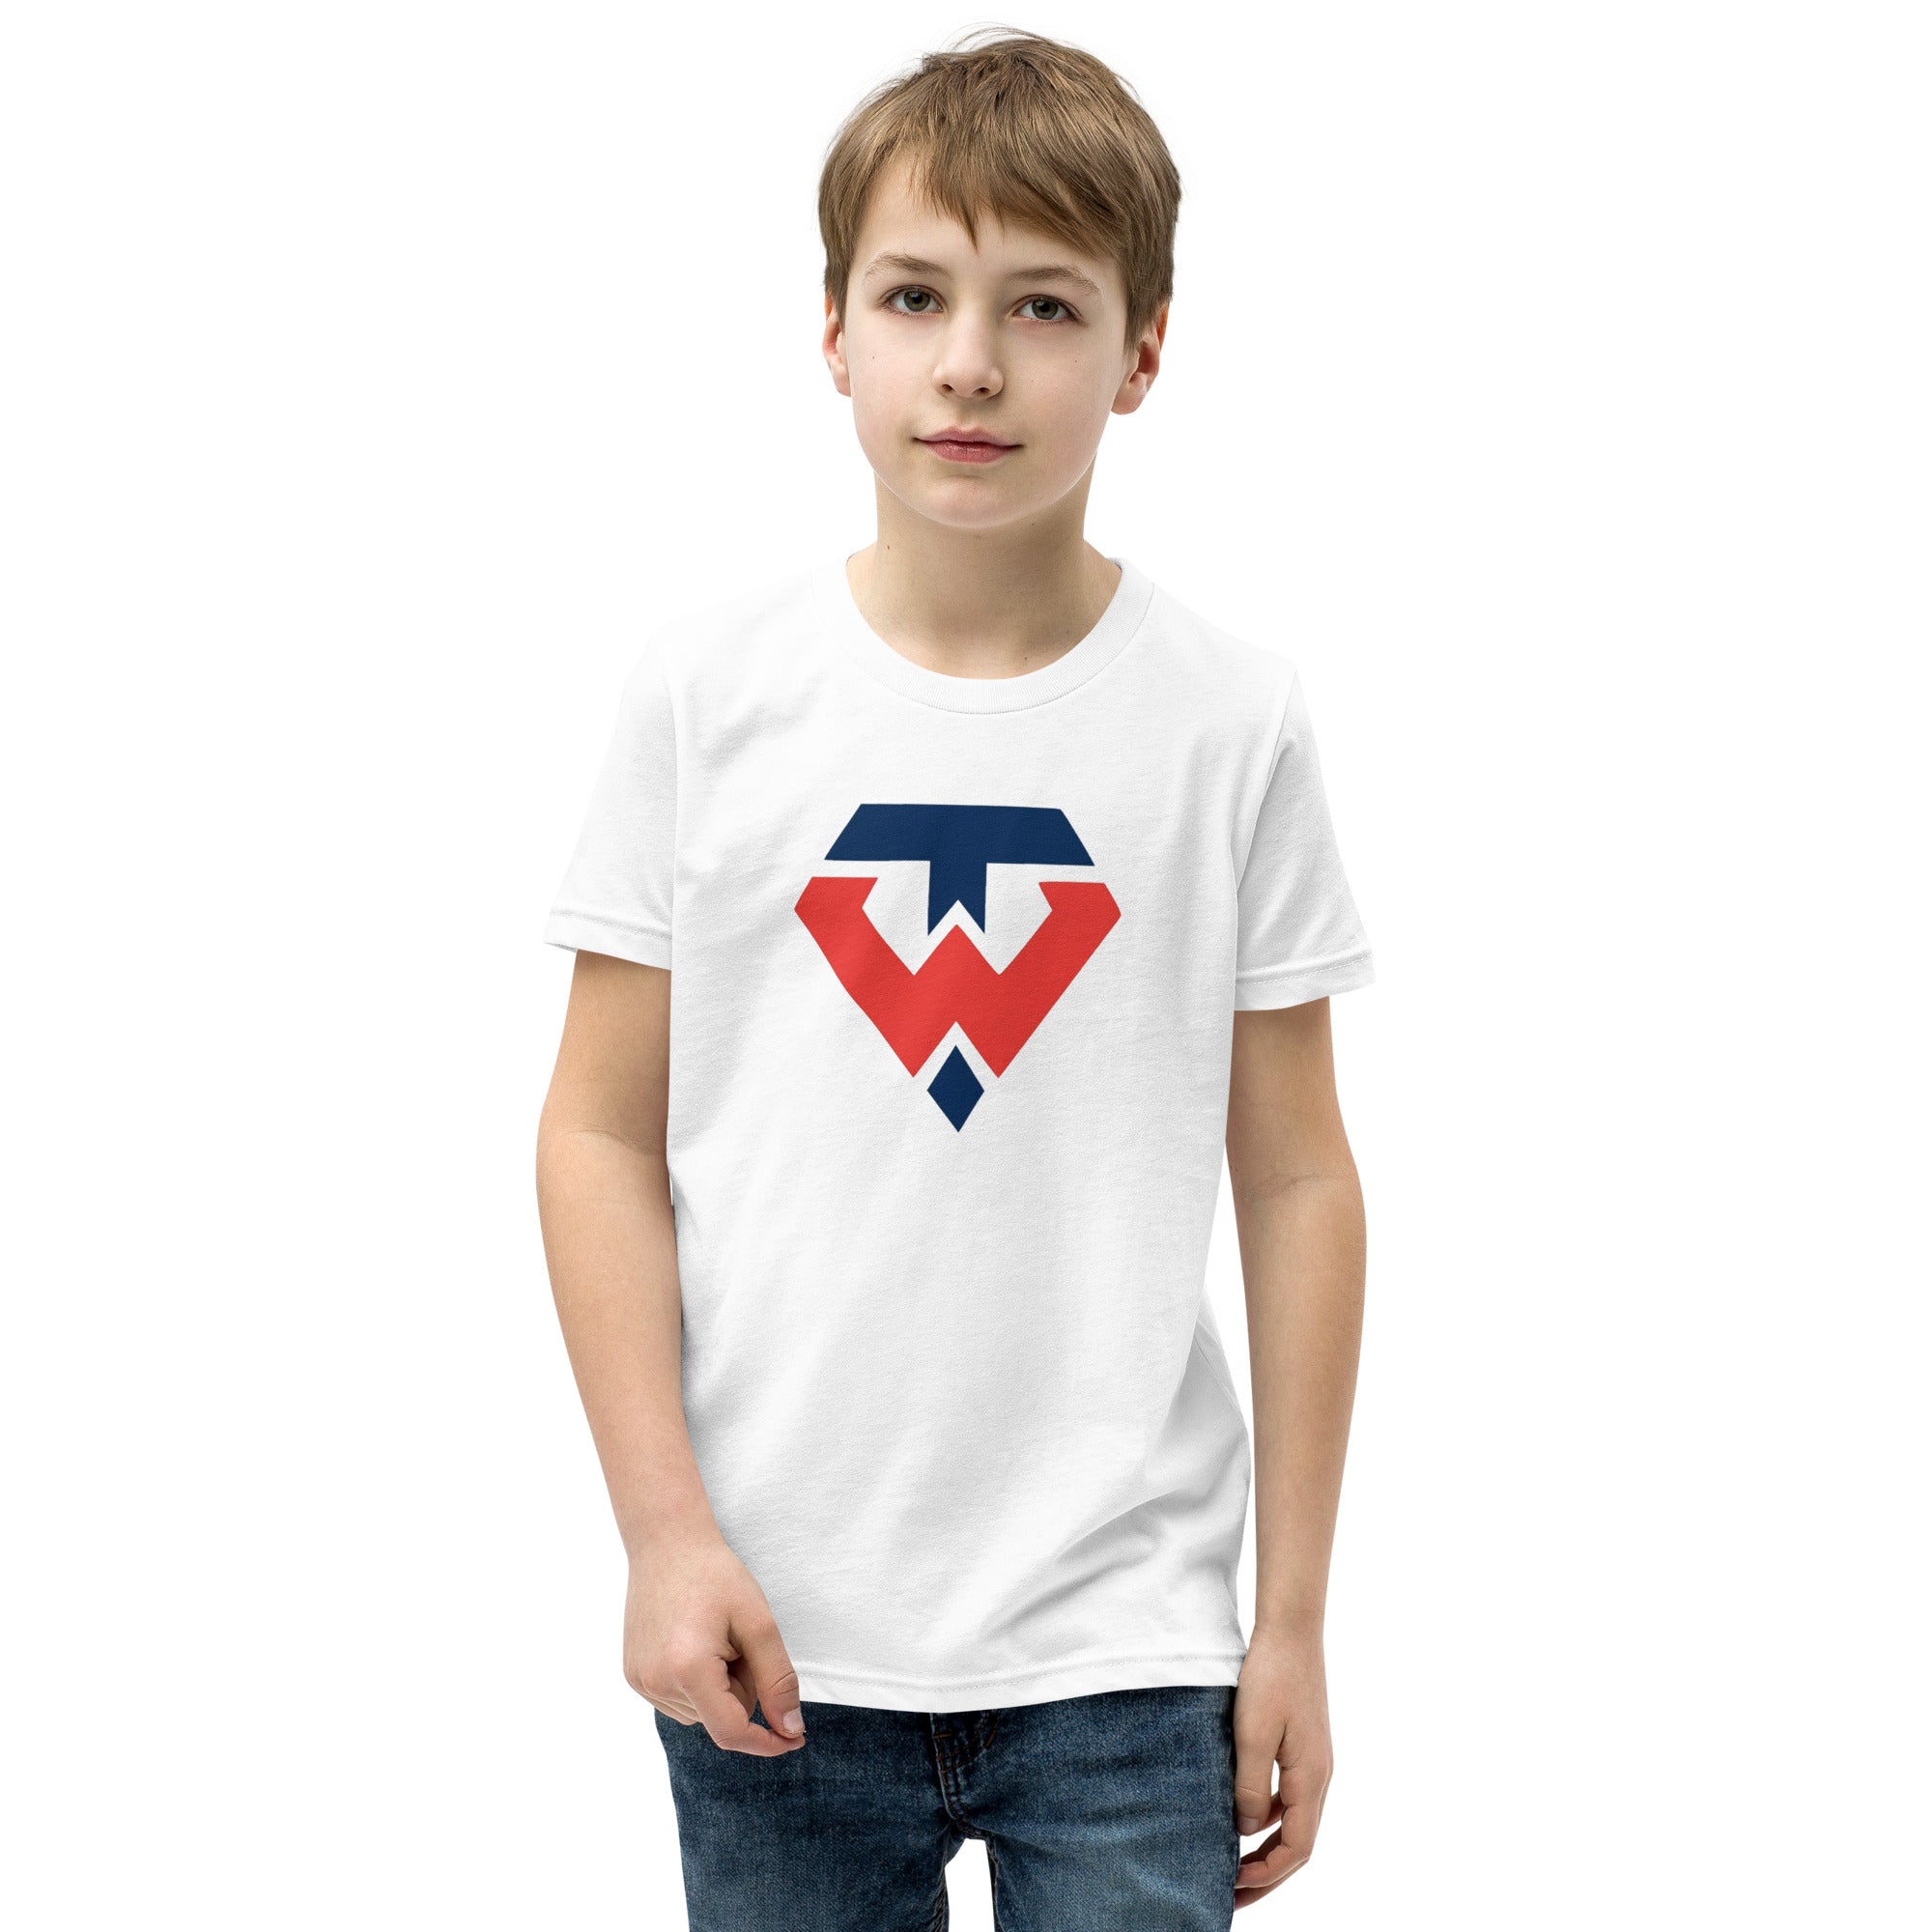 Tampa Warriors TW Seal Youth Short Sleeve T-Shirt